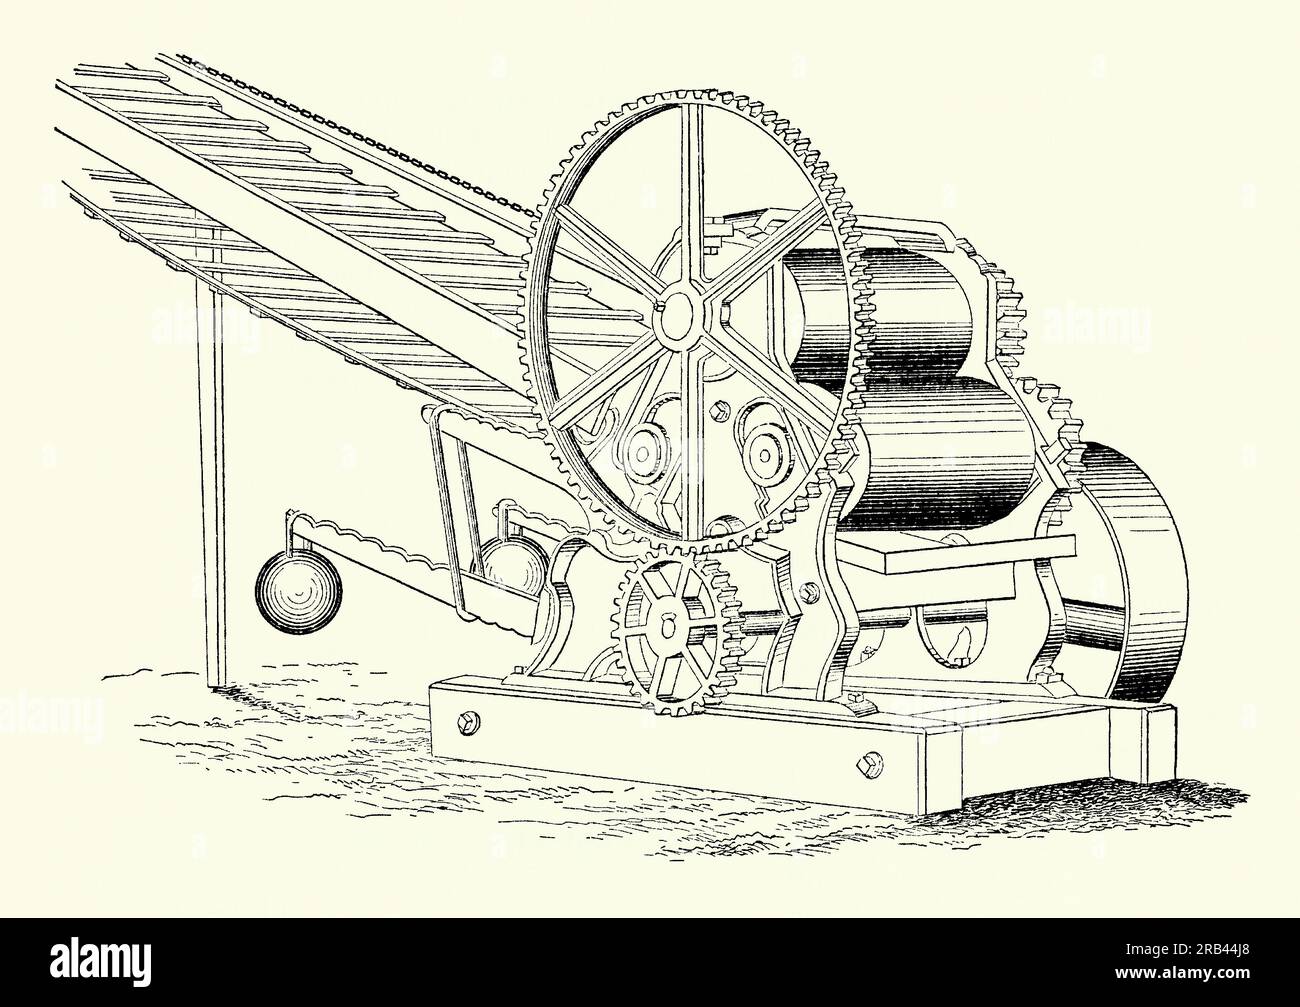 An old engraving of an old sugar cane mill (press or crusher). It is from a Victorian mechanical engineering book of the 1880s. Juice extraction by milling is the process of squeezing the juice from the cane under a set of mills using high pressure between heavy iron rollers – here the cane is fed by a conveyor belt. Mills can have from 3 up to 6 sets of rolls (a set of mills is called a tandem mill or mill train). The juice is collected and sent for further processing. Stock Photo